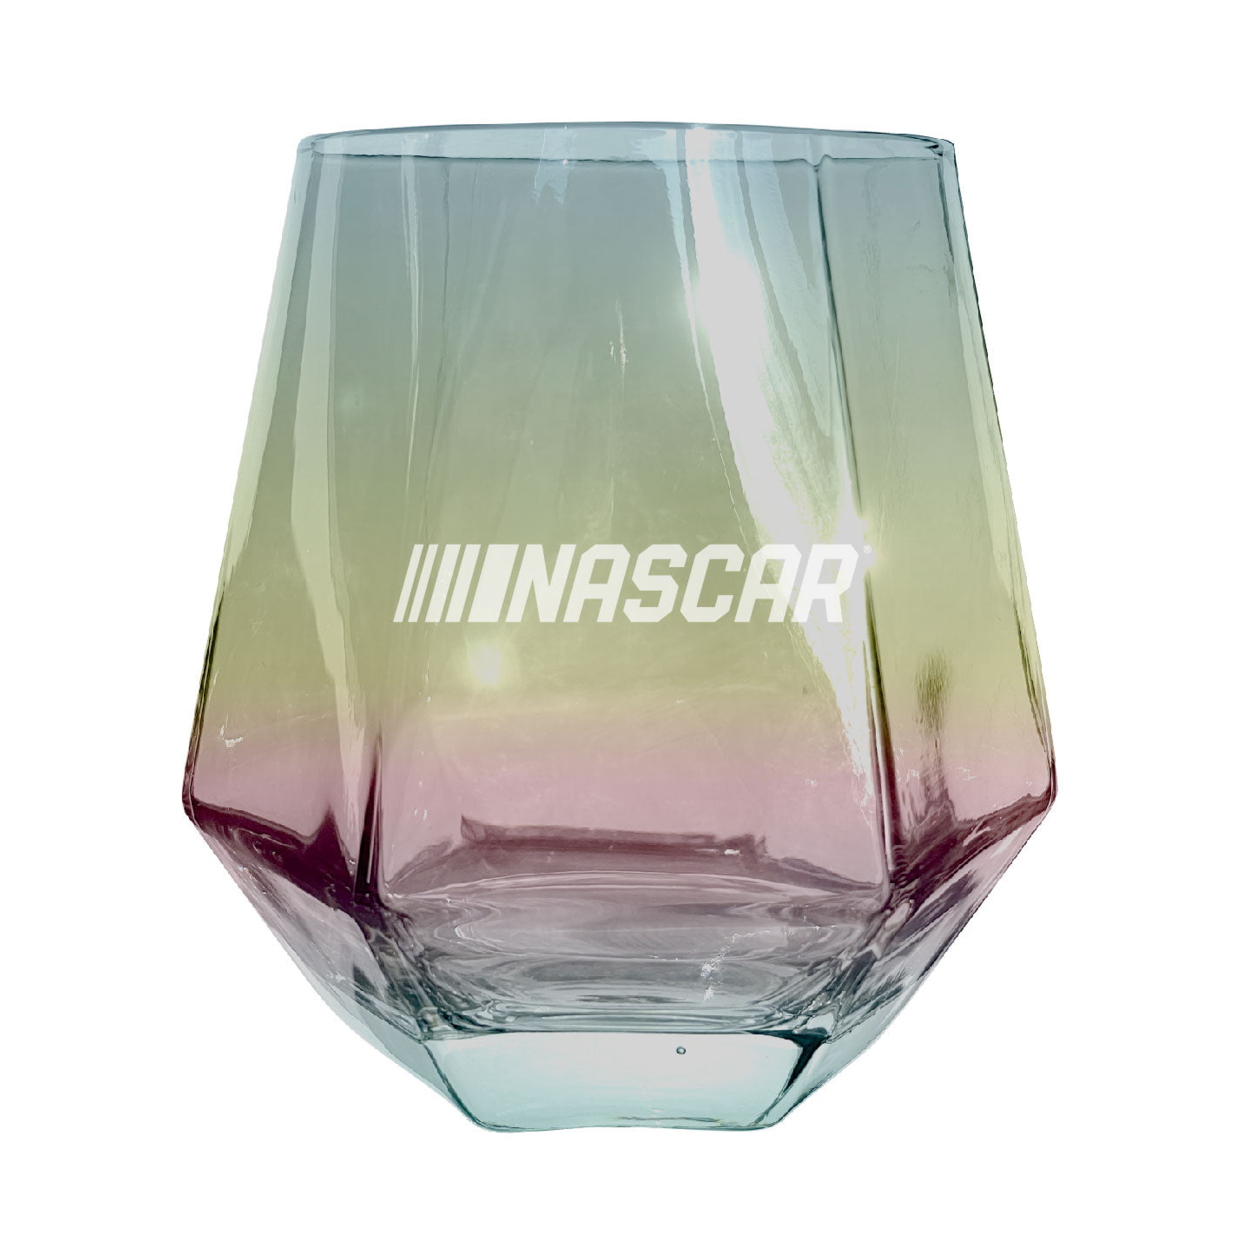 NASCAR Officially Licensed 10 Oz Engraved Diamond Wine Glass - Grey, 2-Pack